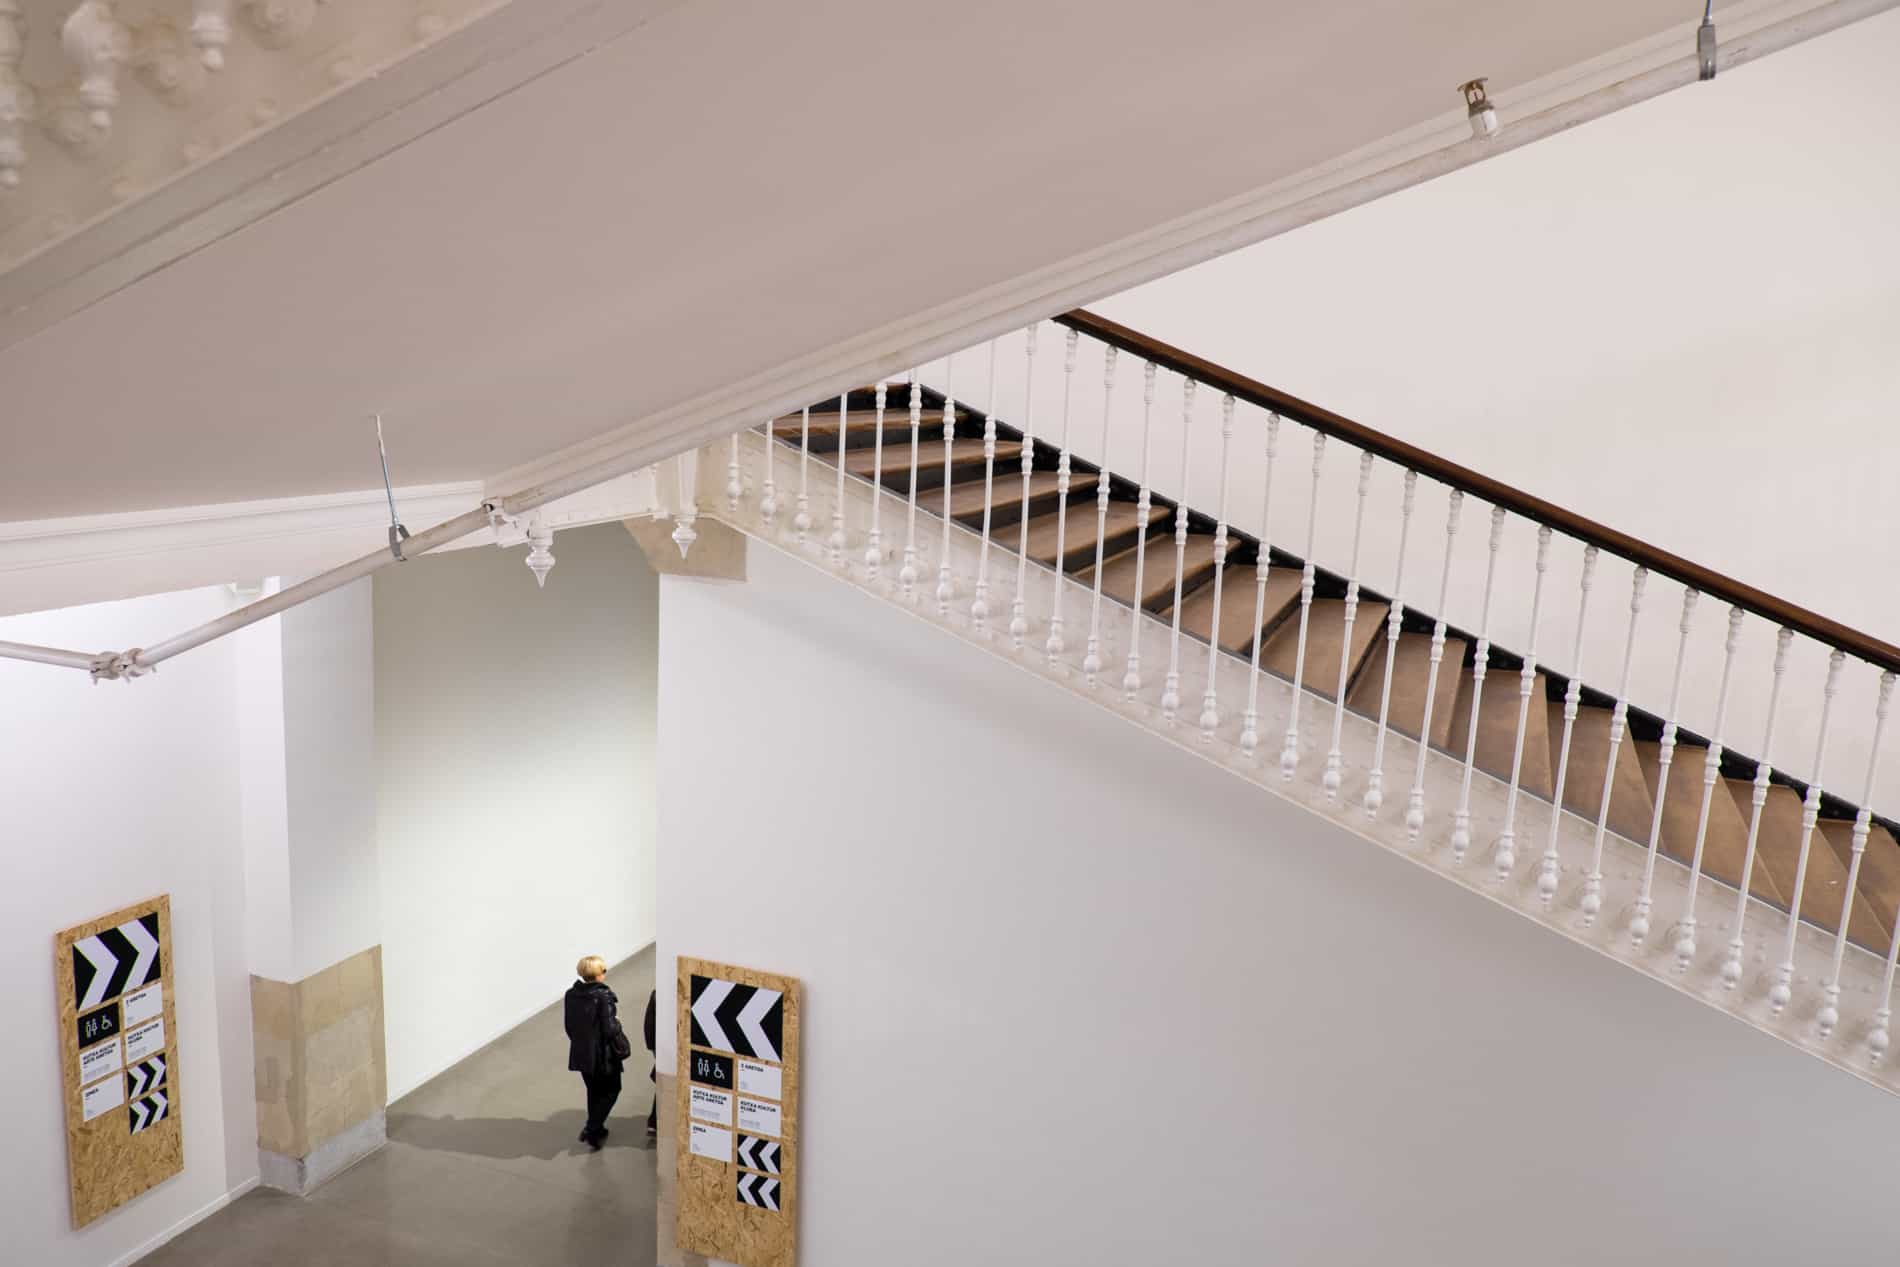 Thew wooden staircases and bright white walls of the Tabakalera Contemporary Culture Centre in San Sebastian.